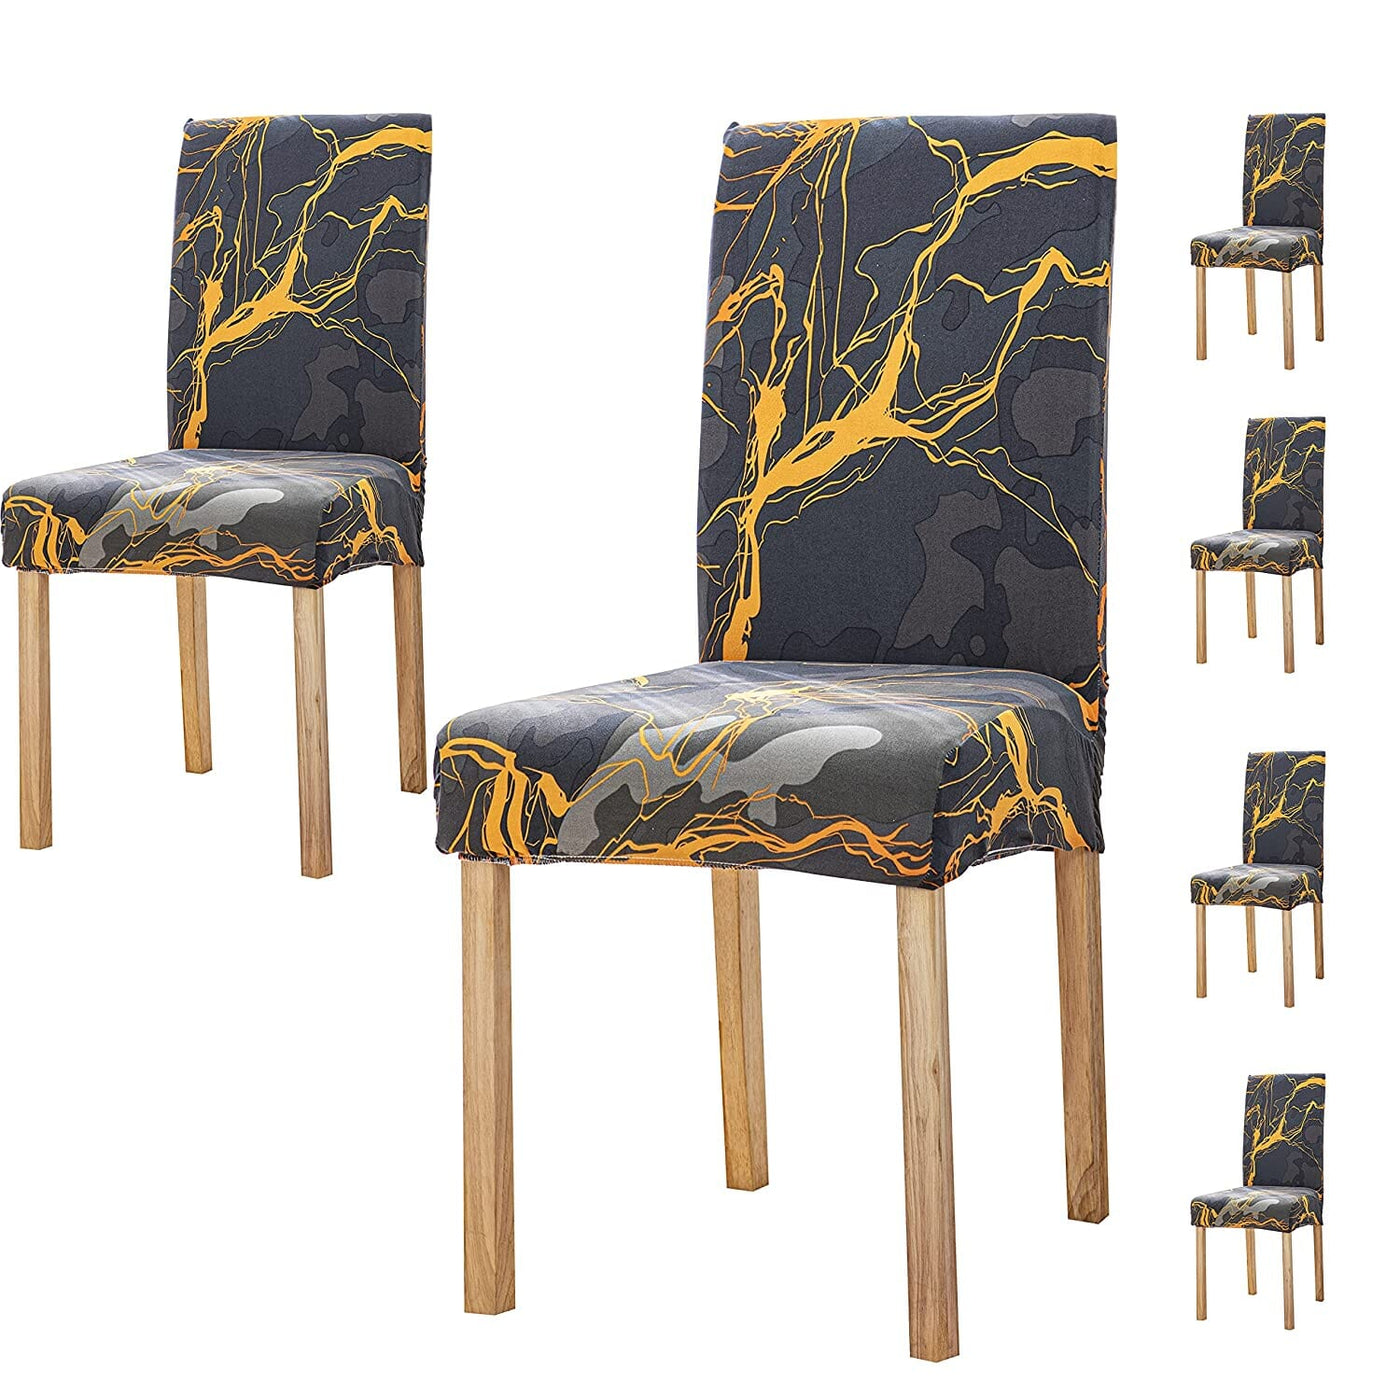 Dark Sunrise Premium Chair Cover - Stretchable & Elastic Fitted Great Happy IN 2 PCS - ₹799 